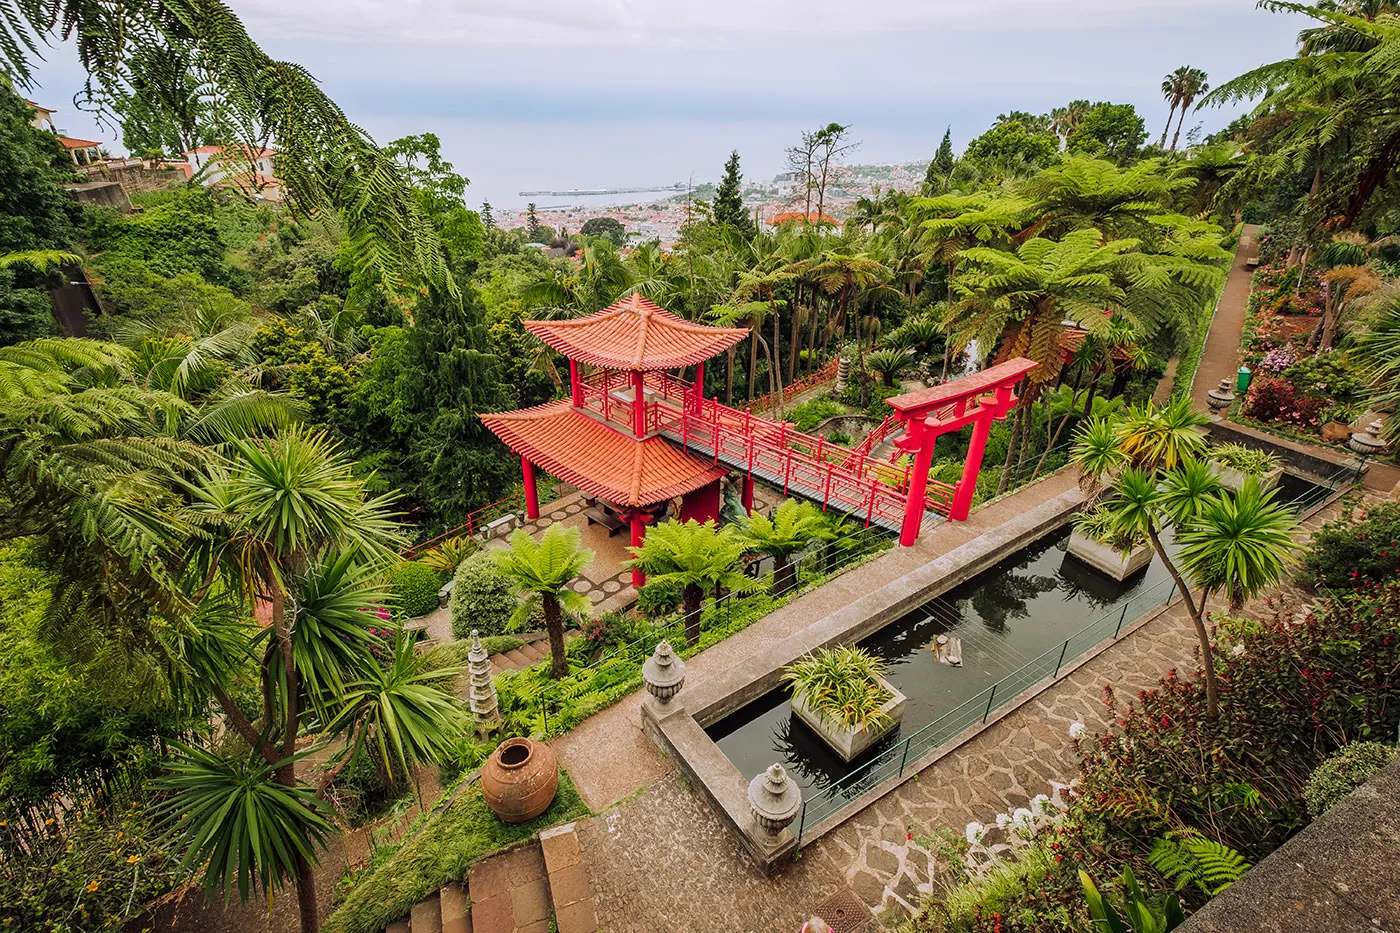 Things to do in Funchal Madeira - Monte Palace Tropical Garden - Japanese garden